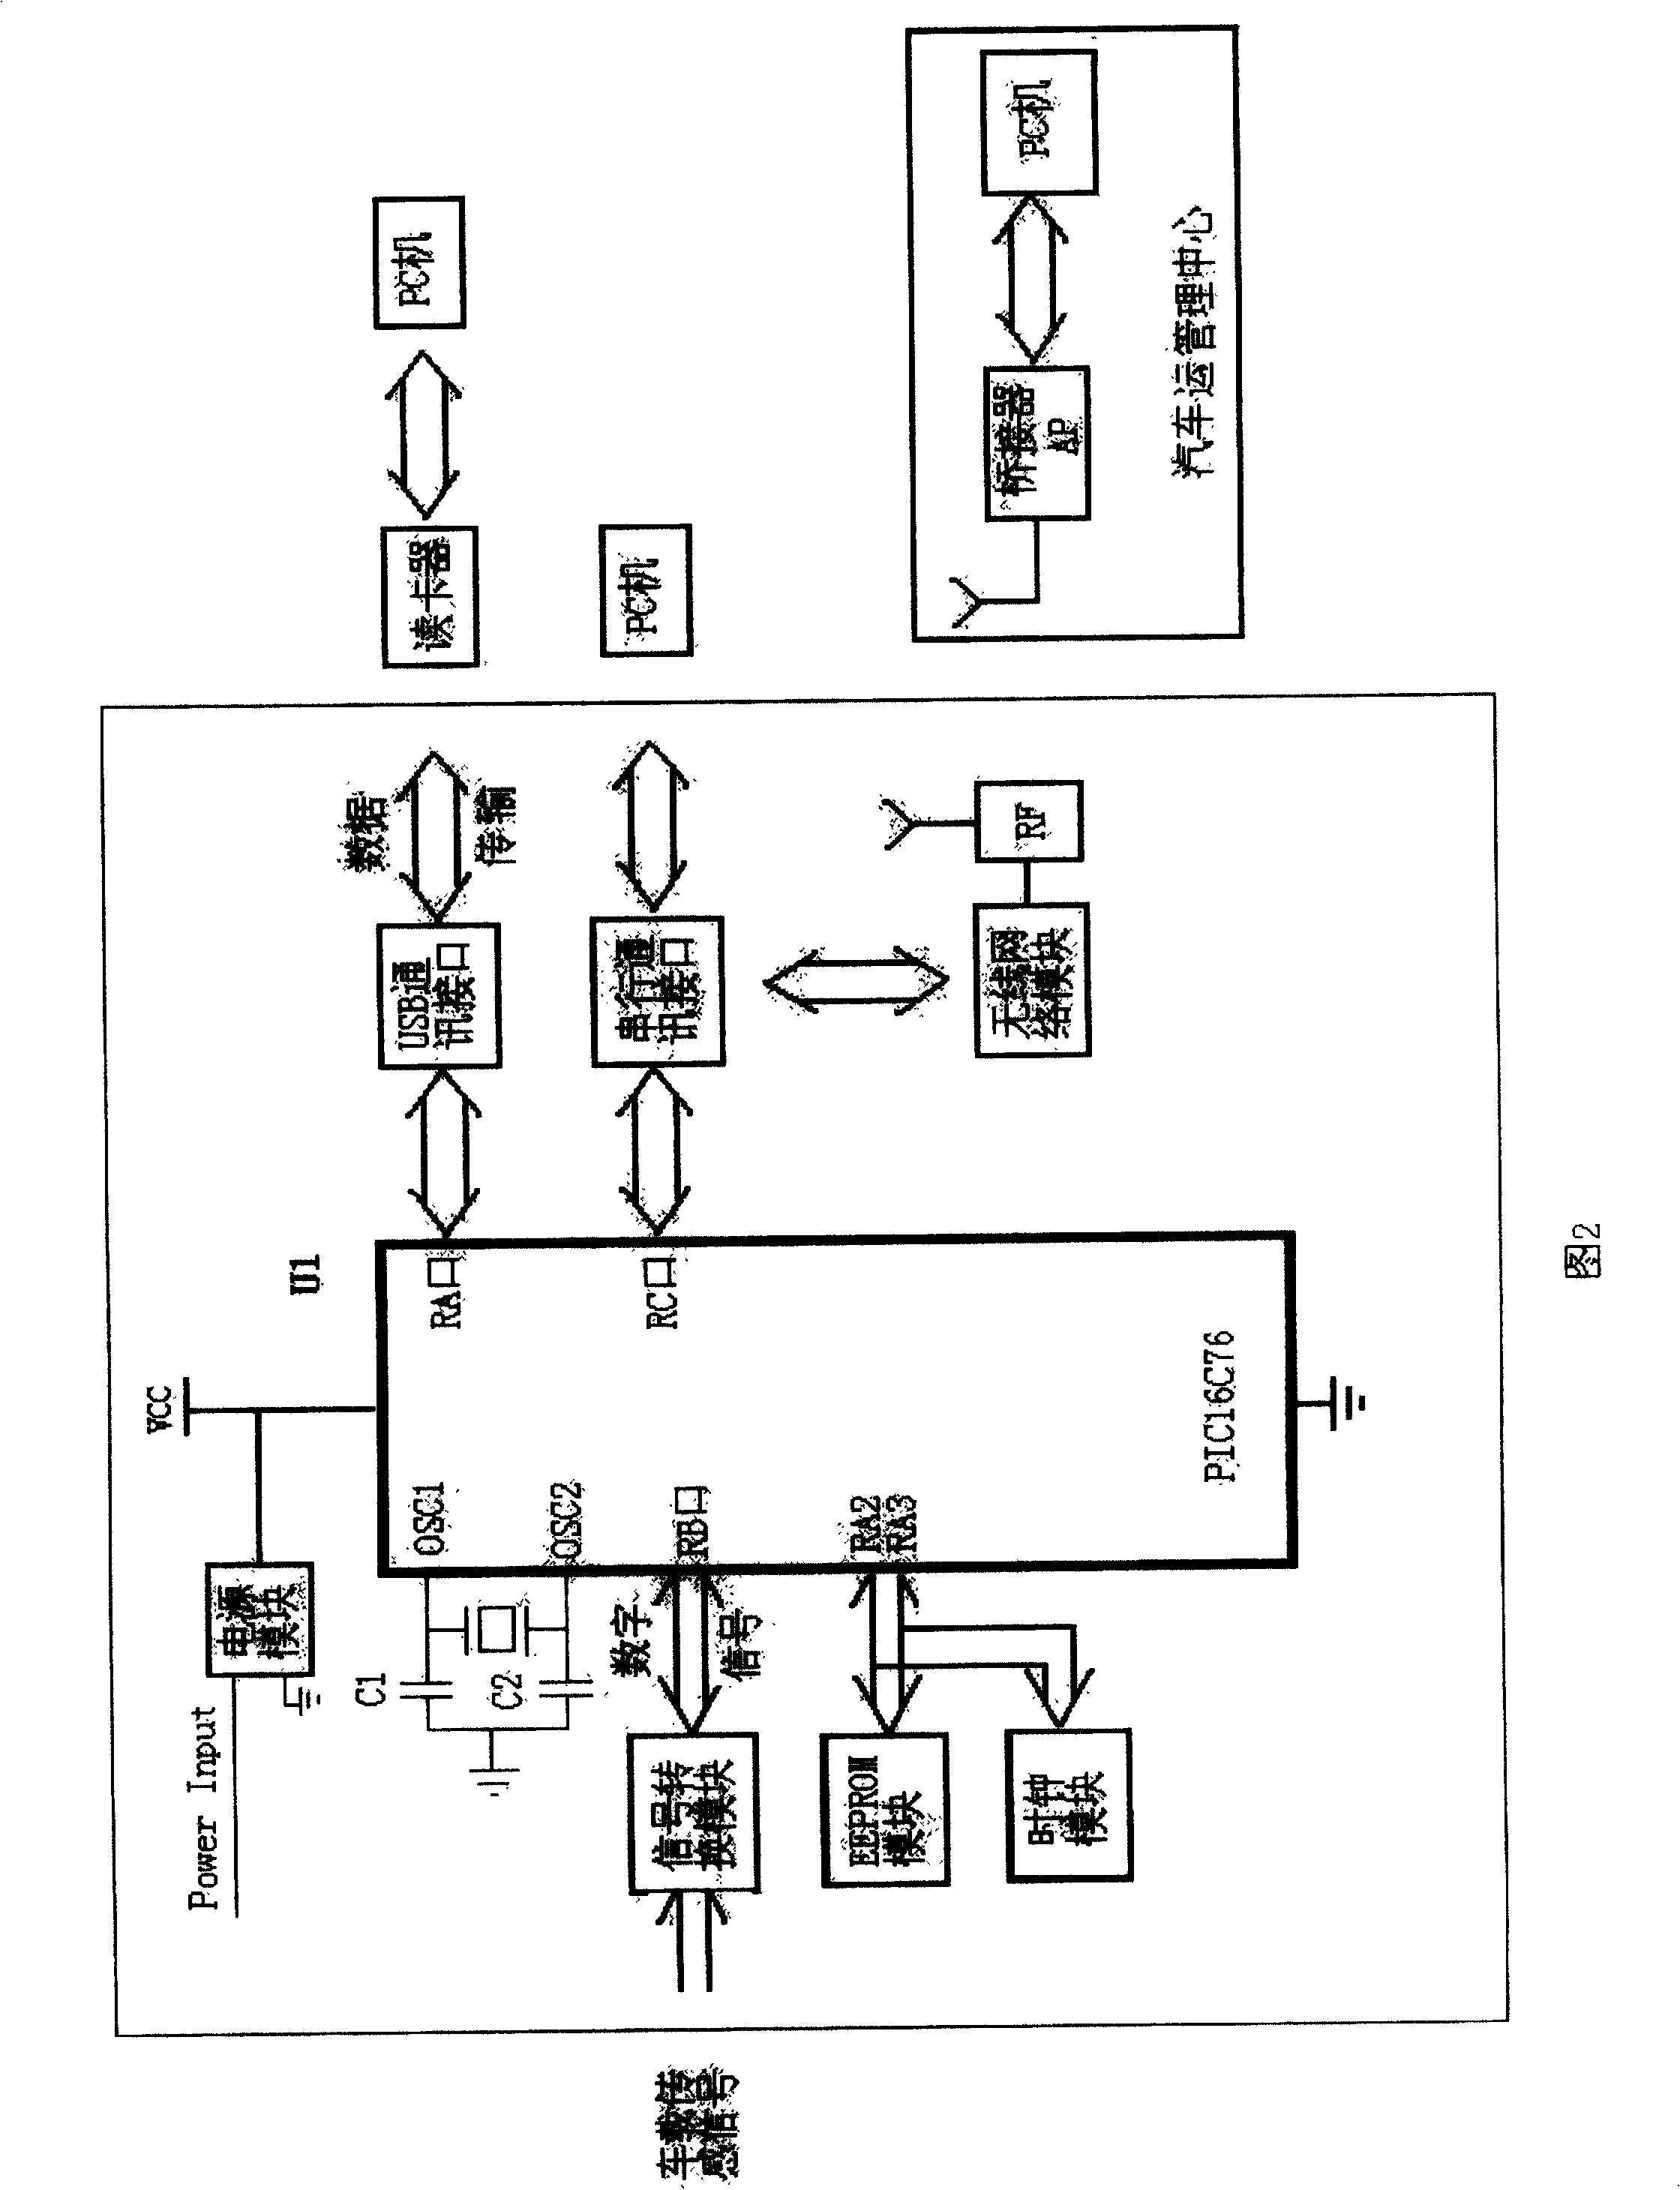 Automobile travel recorder using radio local network transmitting data and its data collecting and transmitting method